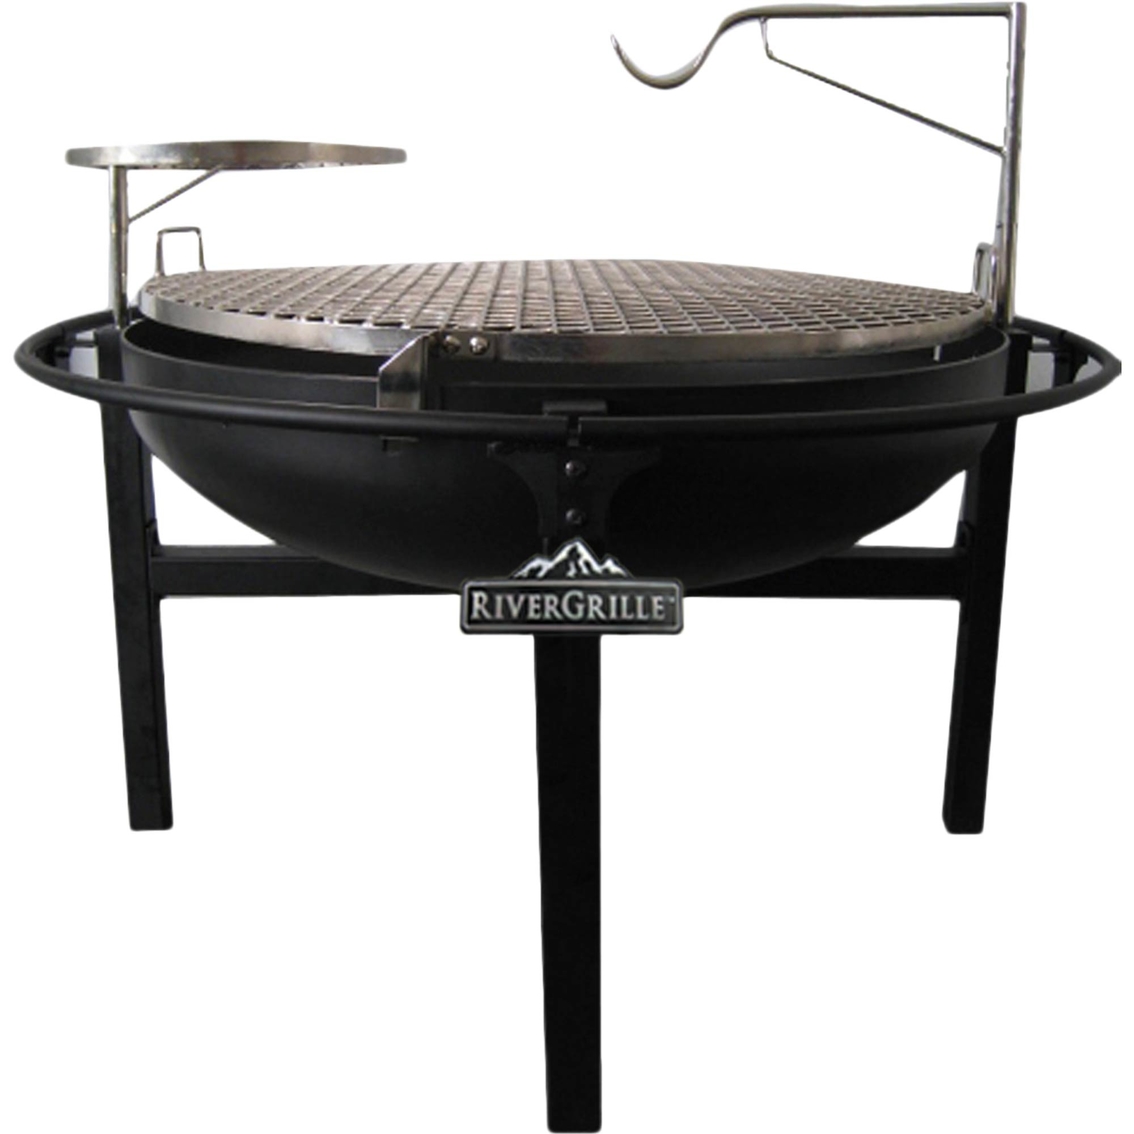 Rivergrille Cowboy Fire Pit Grill, Cowboy Fire Pit Grill Home Depot